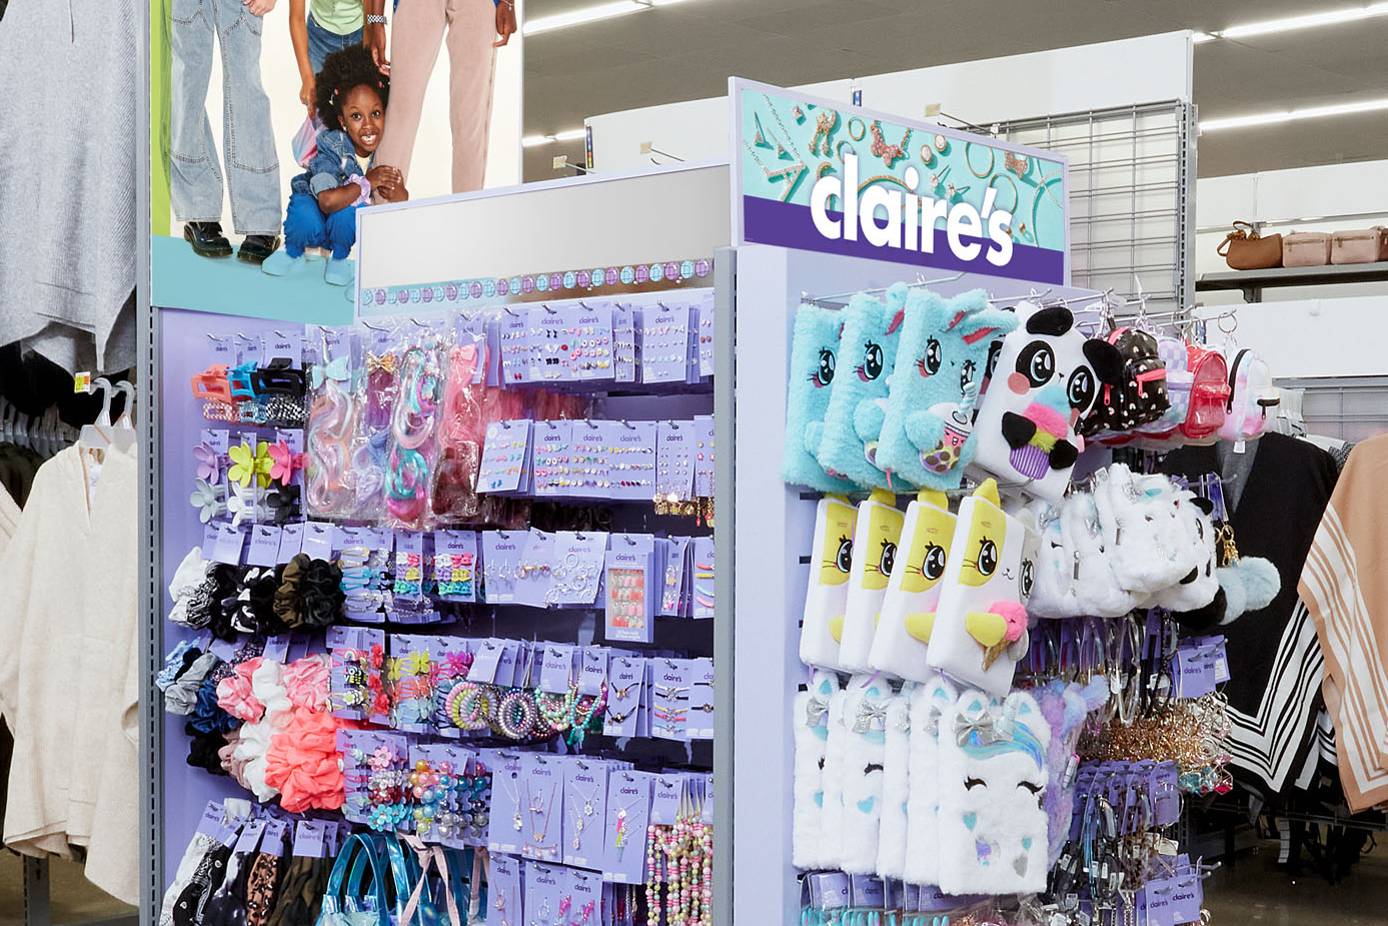 Claire's is back, and Gen Z is loving it - The Hustle